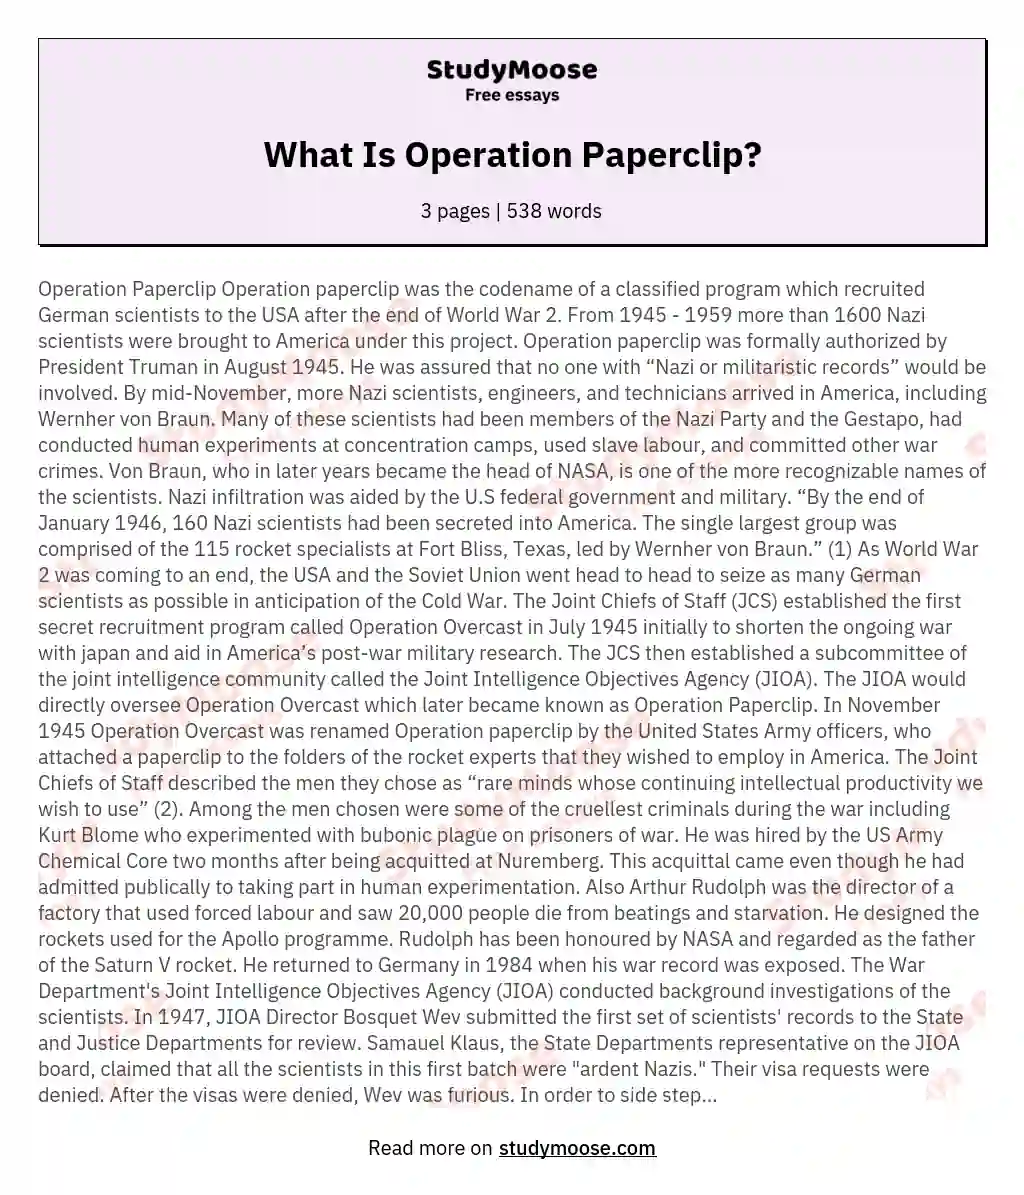 operation paperclip essay